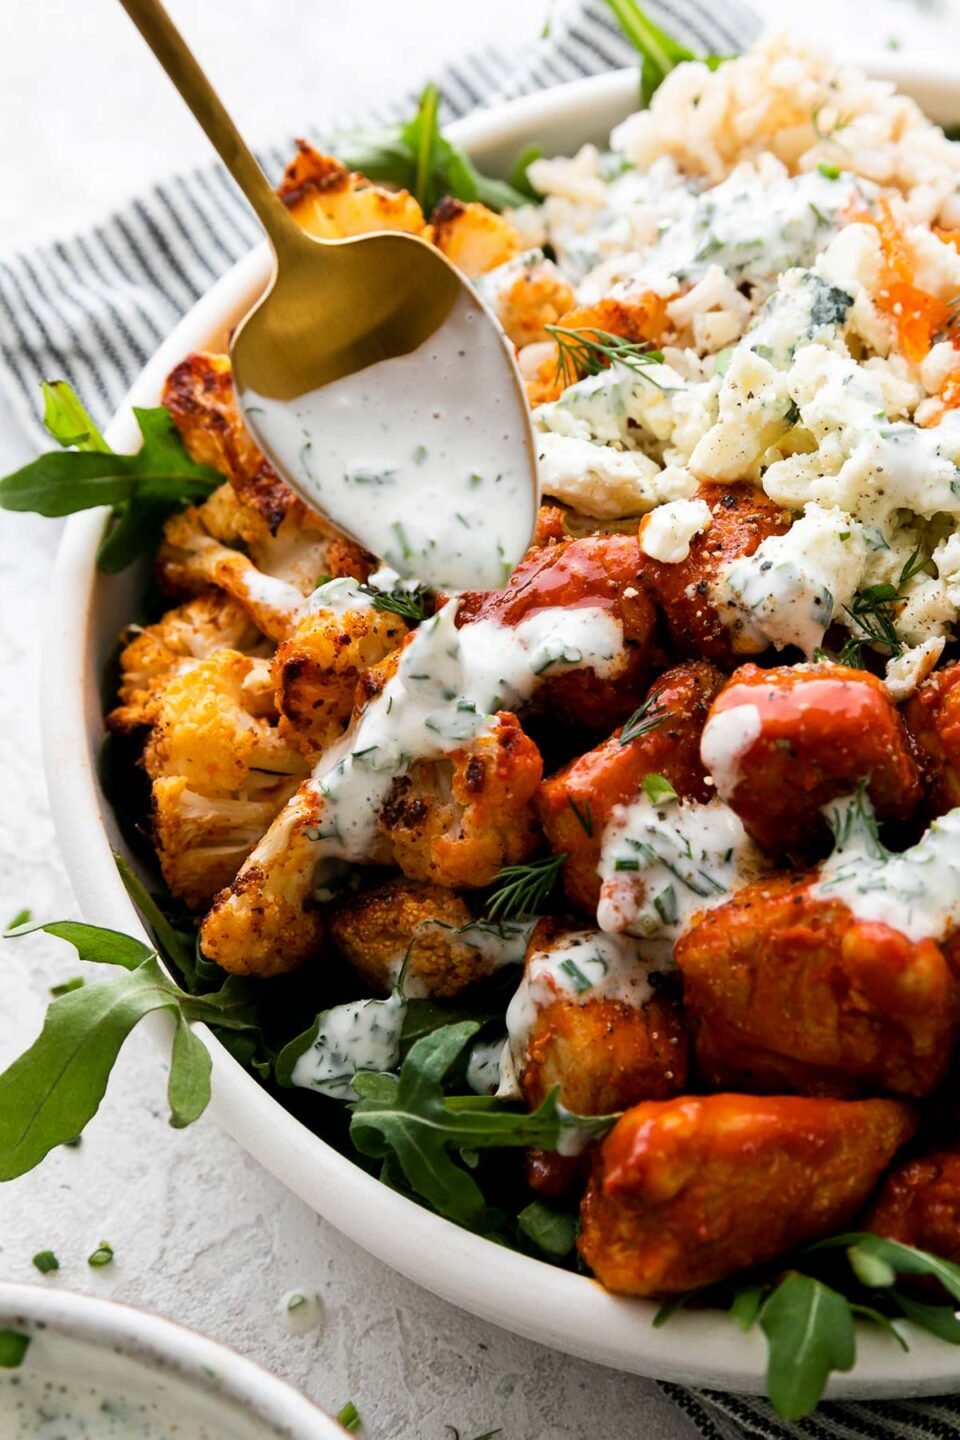 A side angle shot of an assembled & finished Hearty Buffalo Chicken bowl. The bowl is made with cooked brown rice, a bed of arugula, finely shredded cabbage, easy skillet buffalo chicken, roasted cauliflower, grated carrots, cheese, and herby ranch yogurt drizzle over top. The bowls sits atop a creamy white textured surface with a blue and white striped linen napkin resting underneath. A small bowl filled with herby ranch yogurt drizzle sits alongside the buffalo chicken rice bowl and a gold spoon hovers over the buffalo chicken bowl as it is used to drizzle on the ranch yogurt dressing.